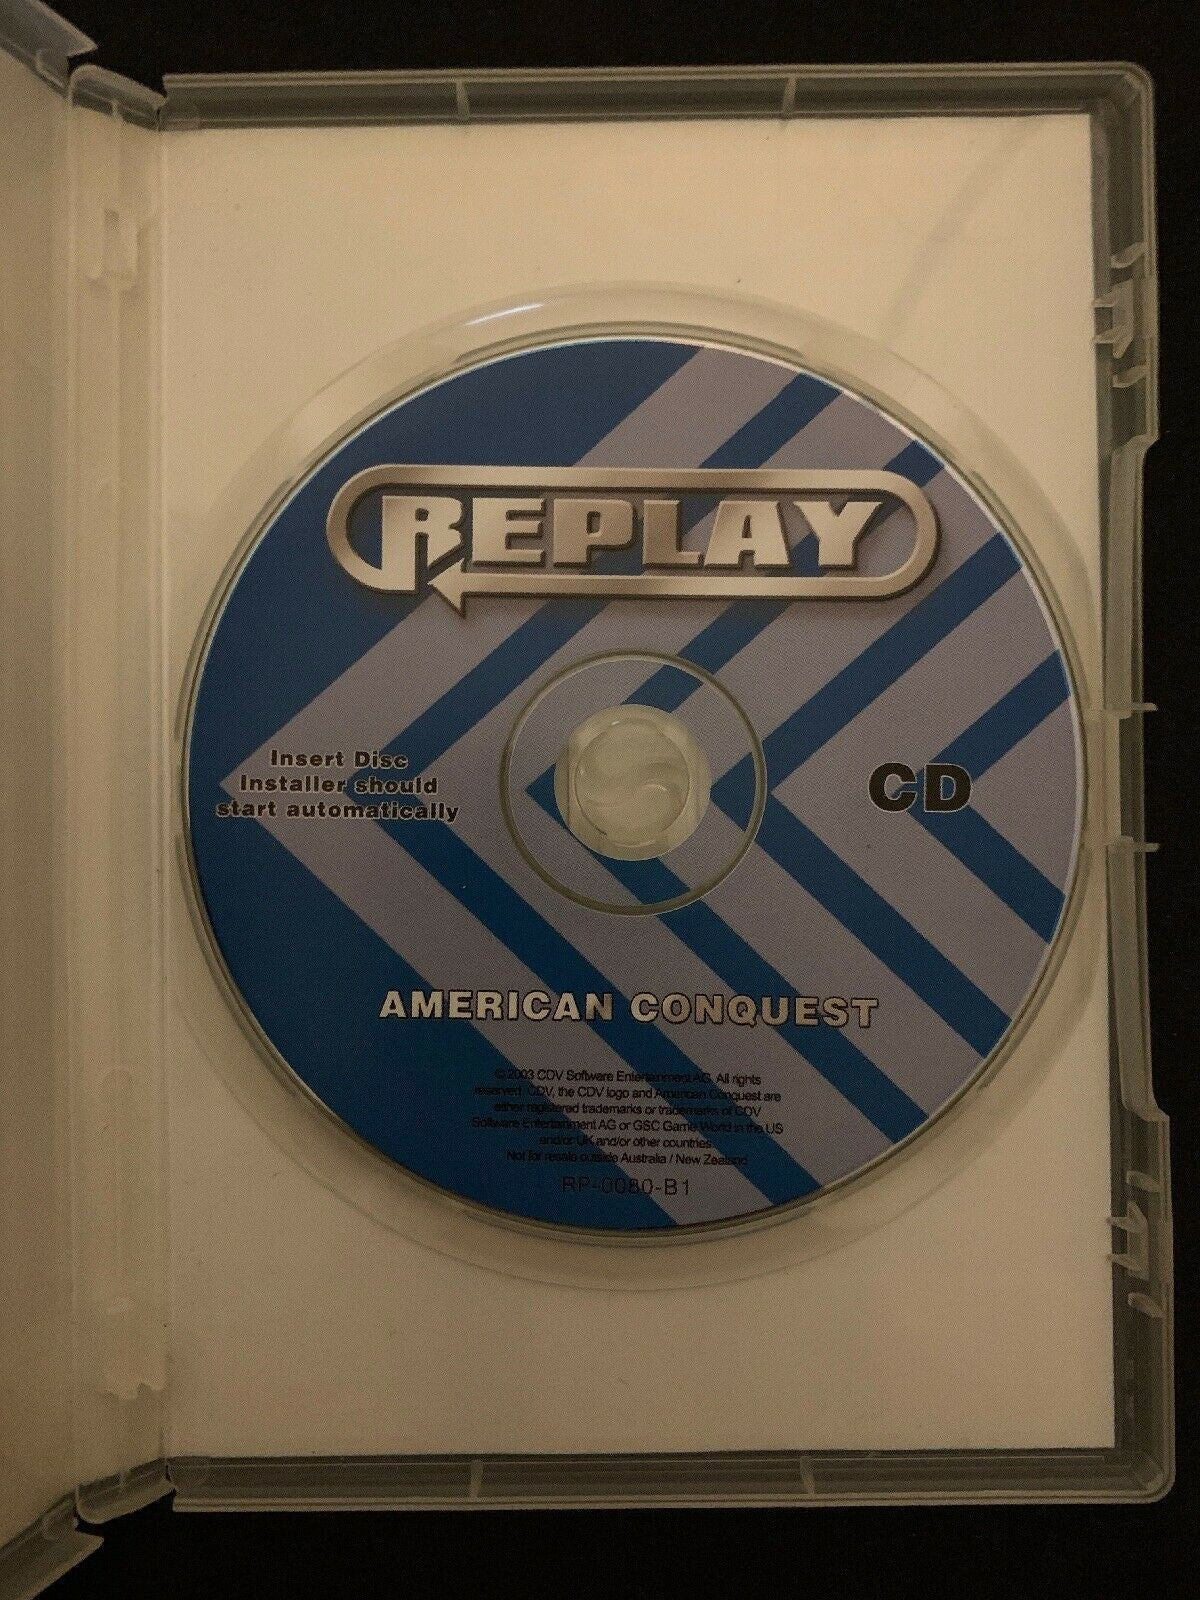 American Conquest - PC CD-ROM Strategy Game